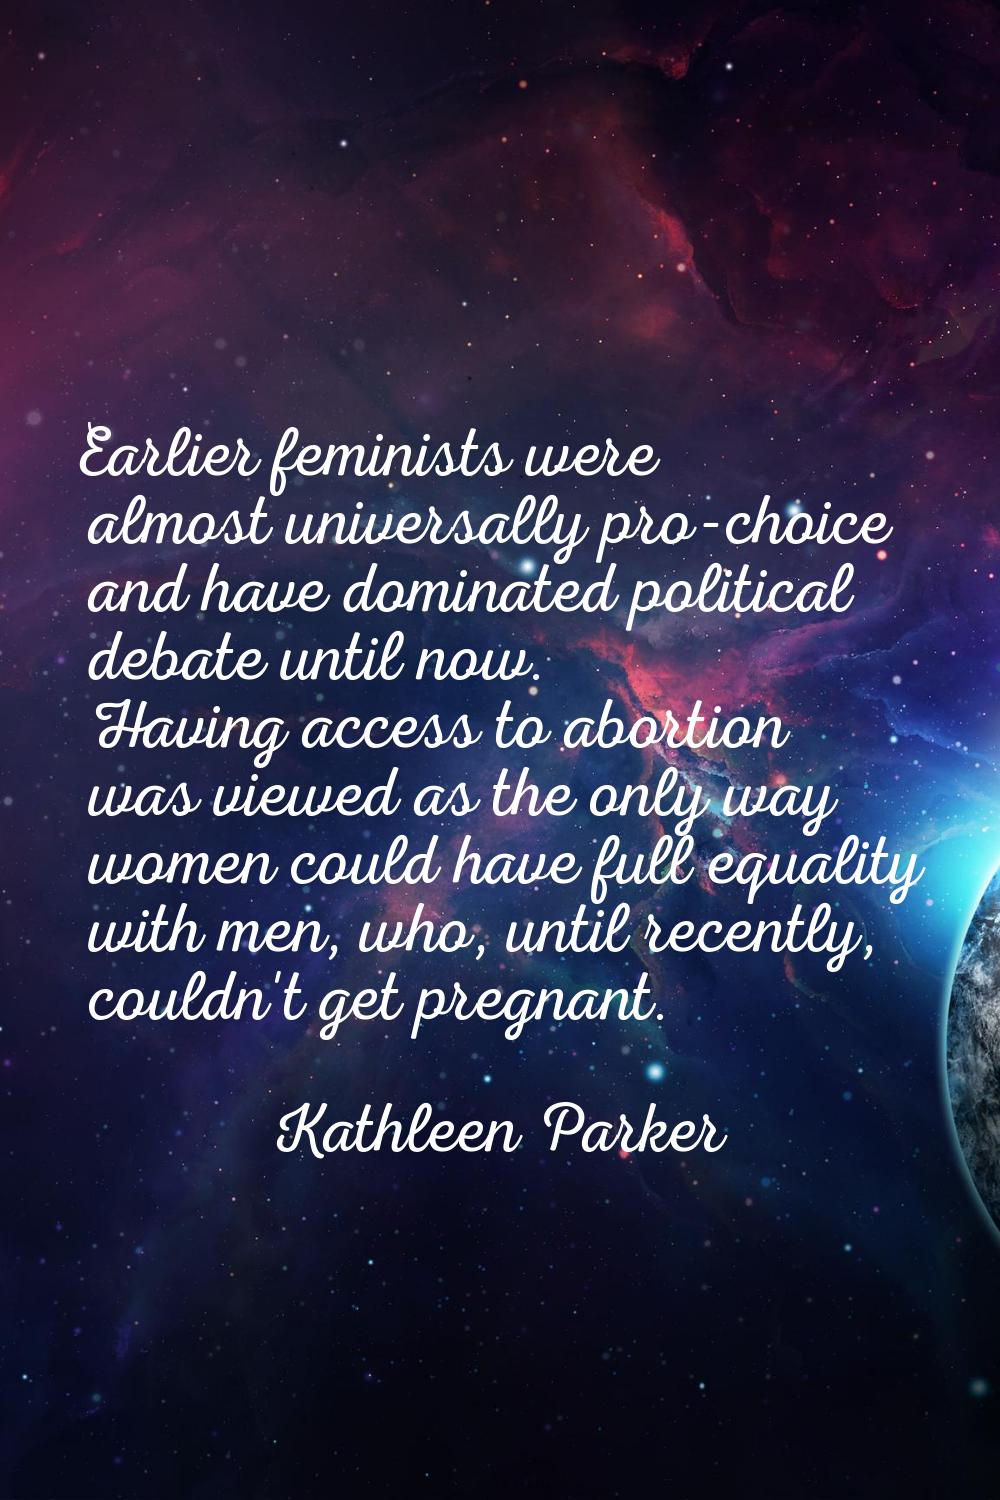 Earlier feminists were almost universally pro-choice and have dominated political debate until now.